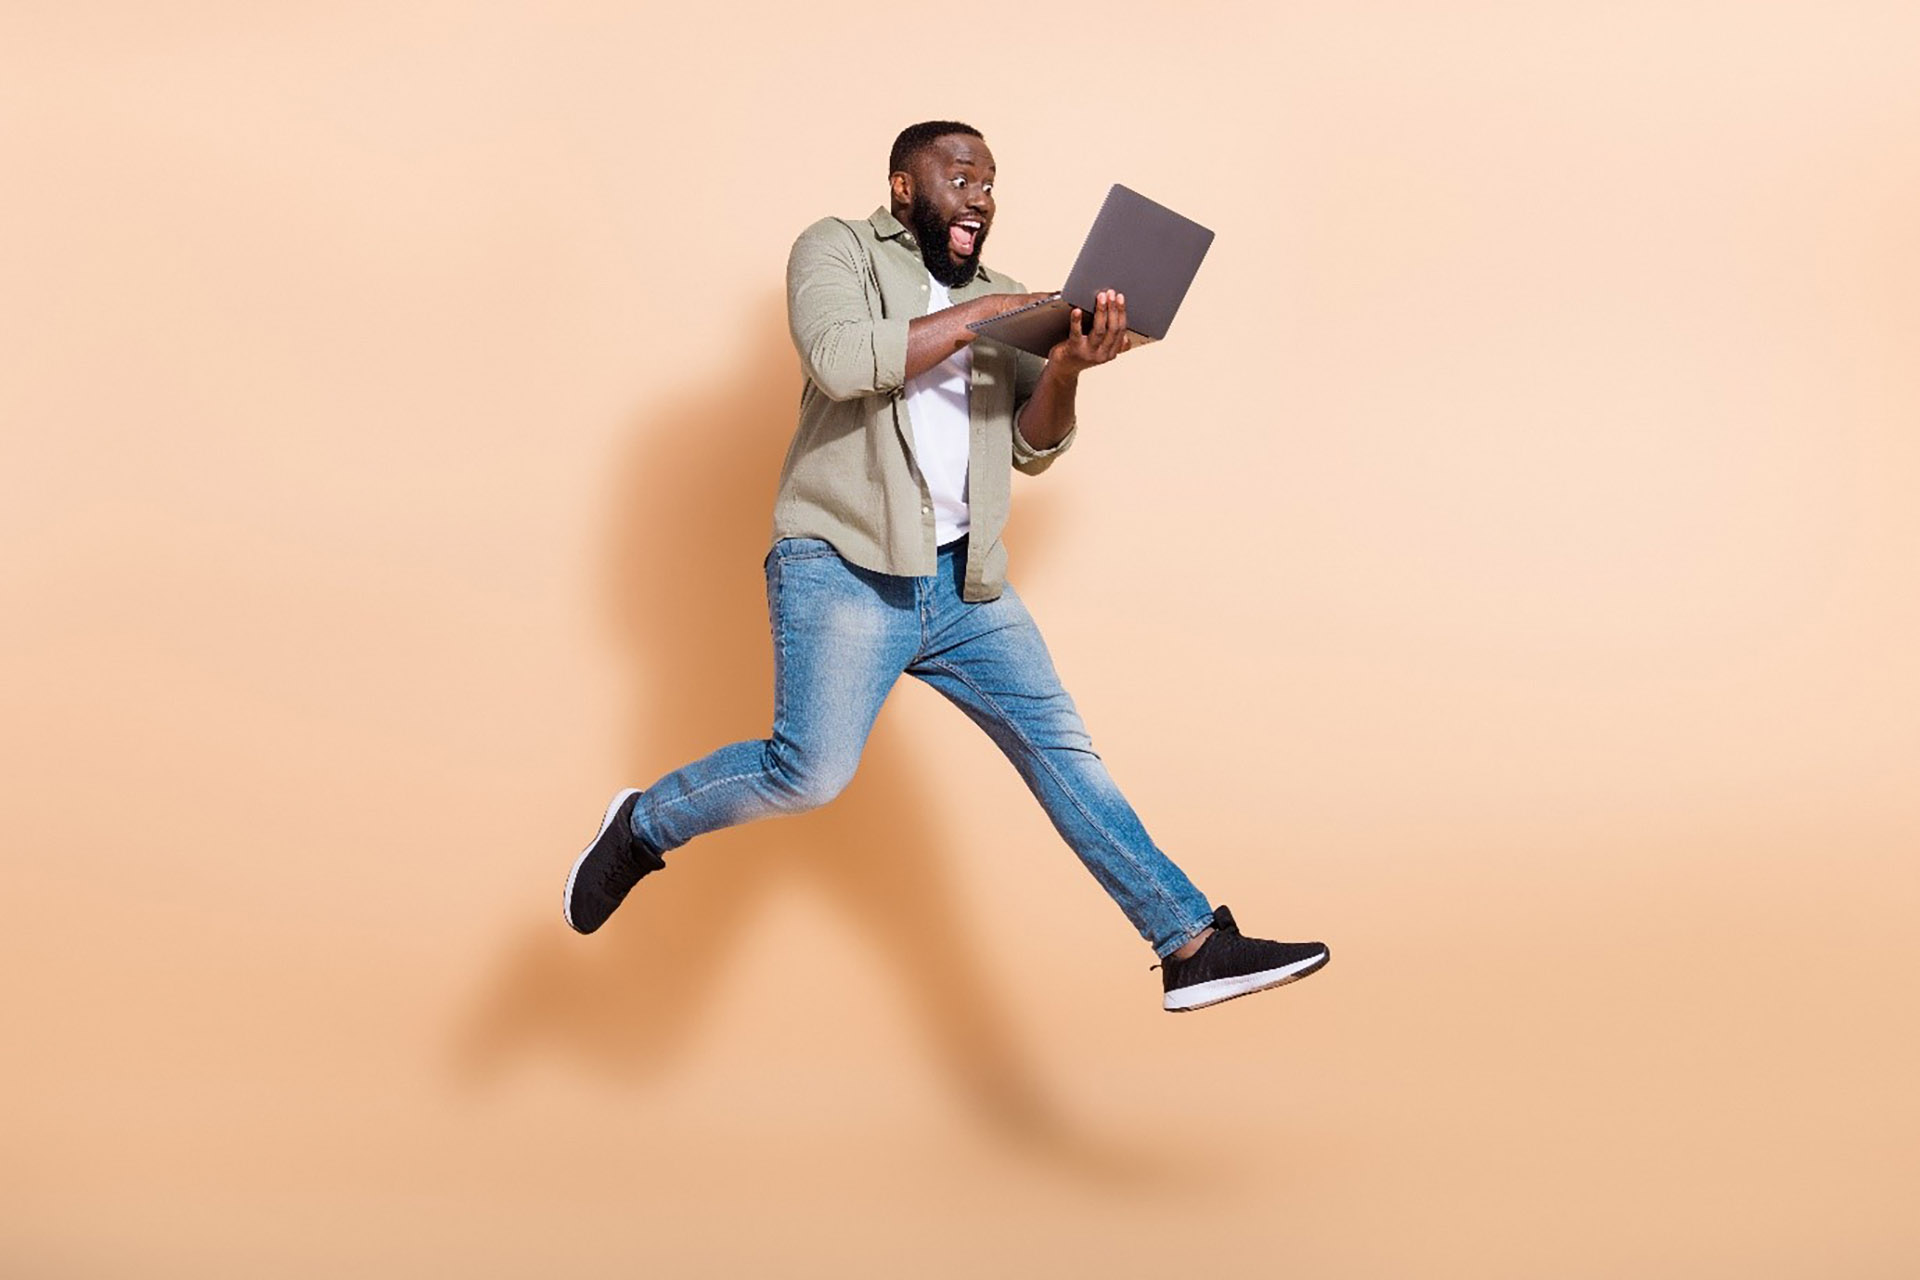 Man jumping in the air reading a book